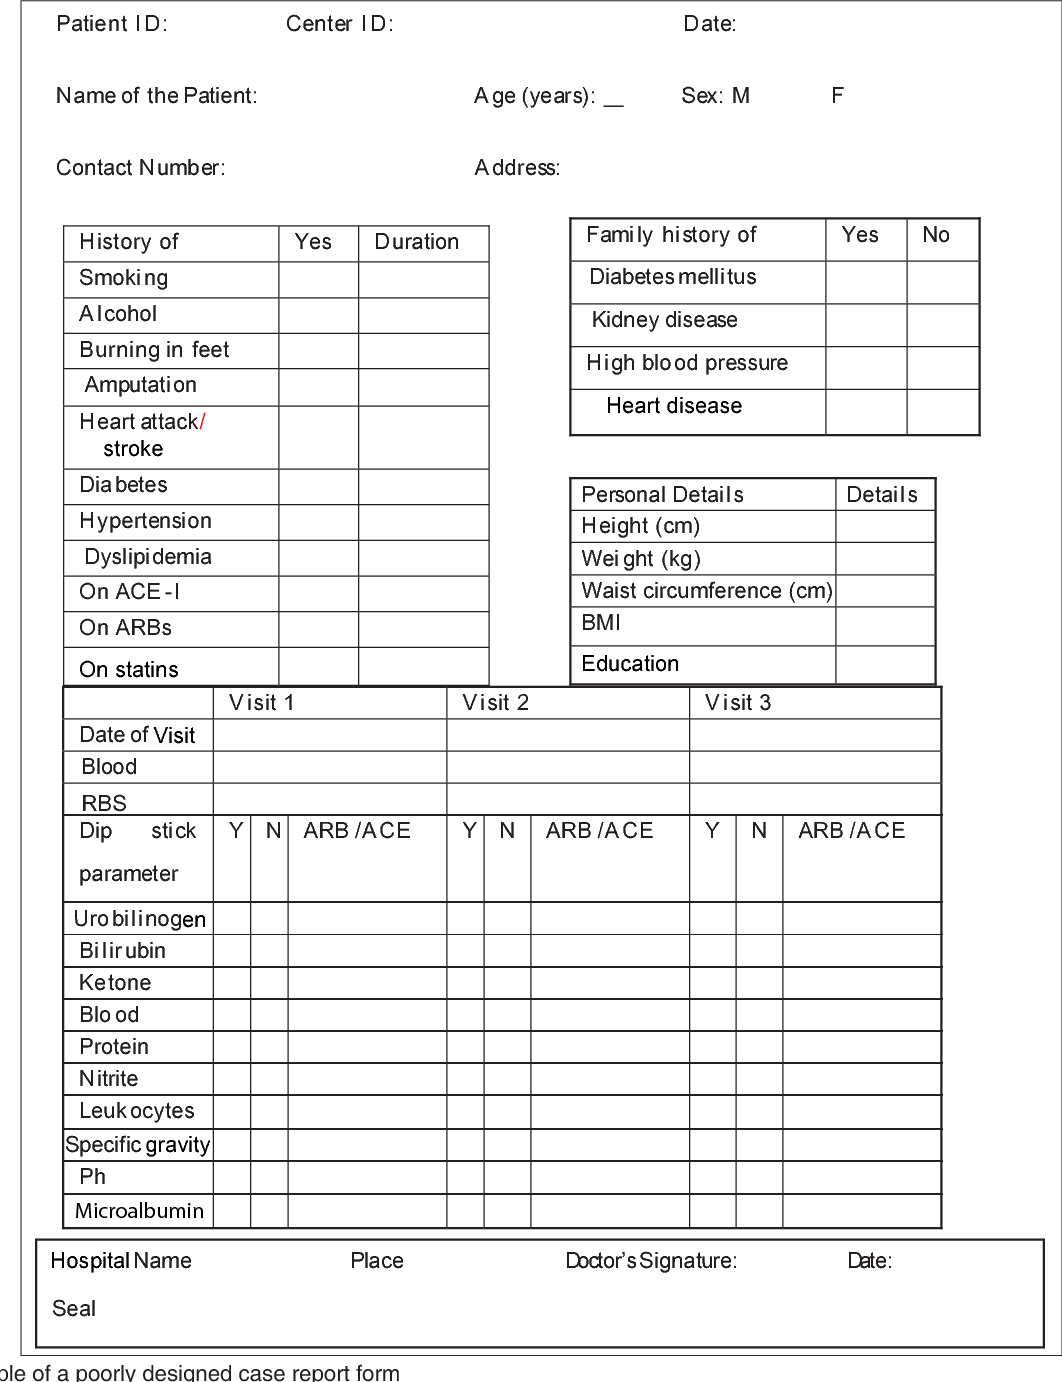 Basics Of Case Report Form Designing In Clinical Research Regarding